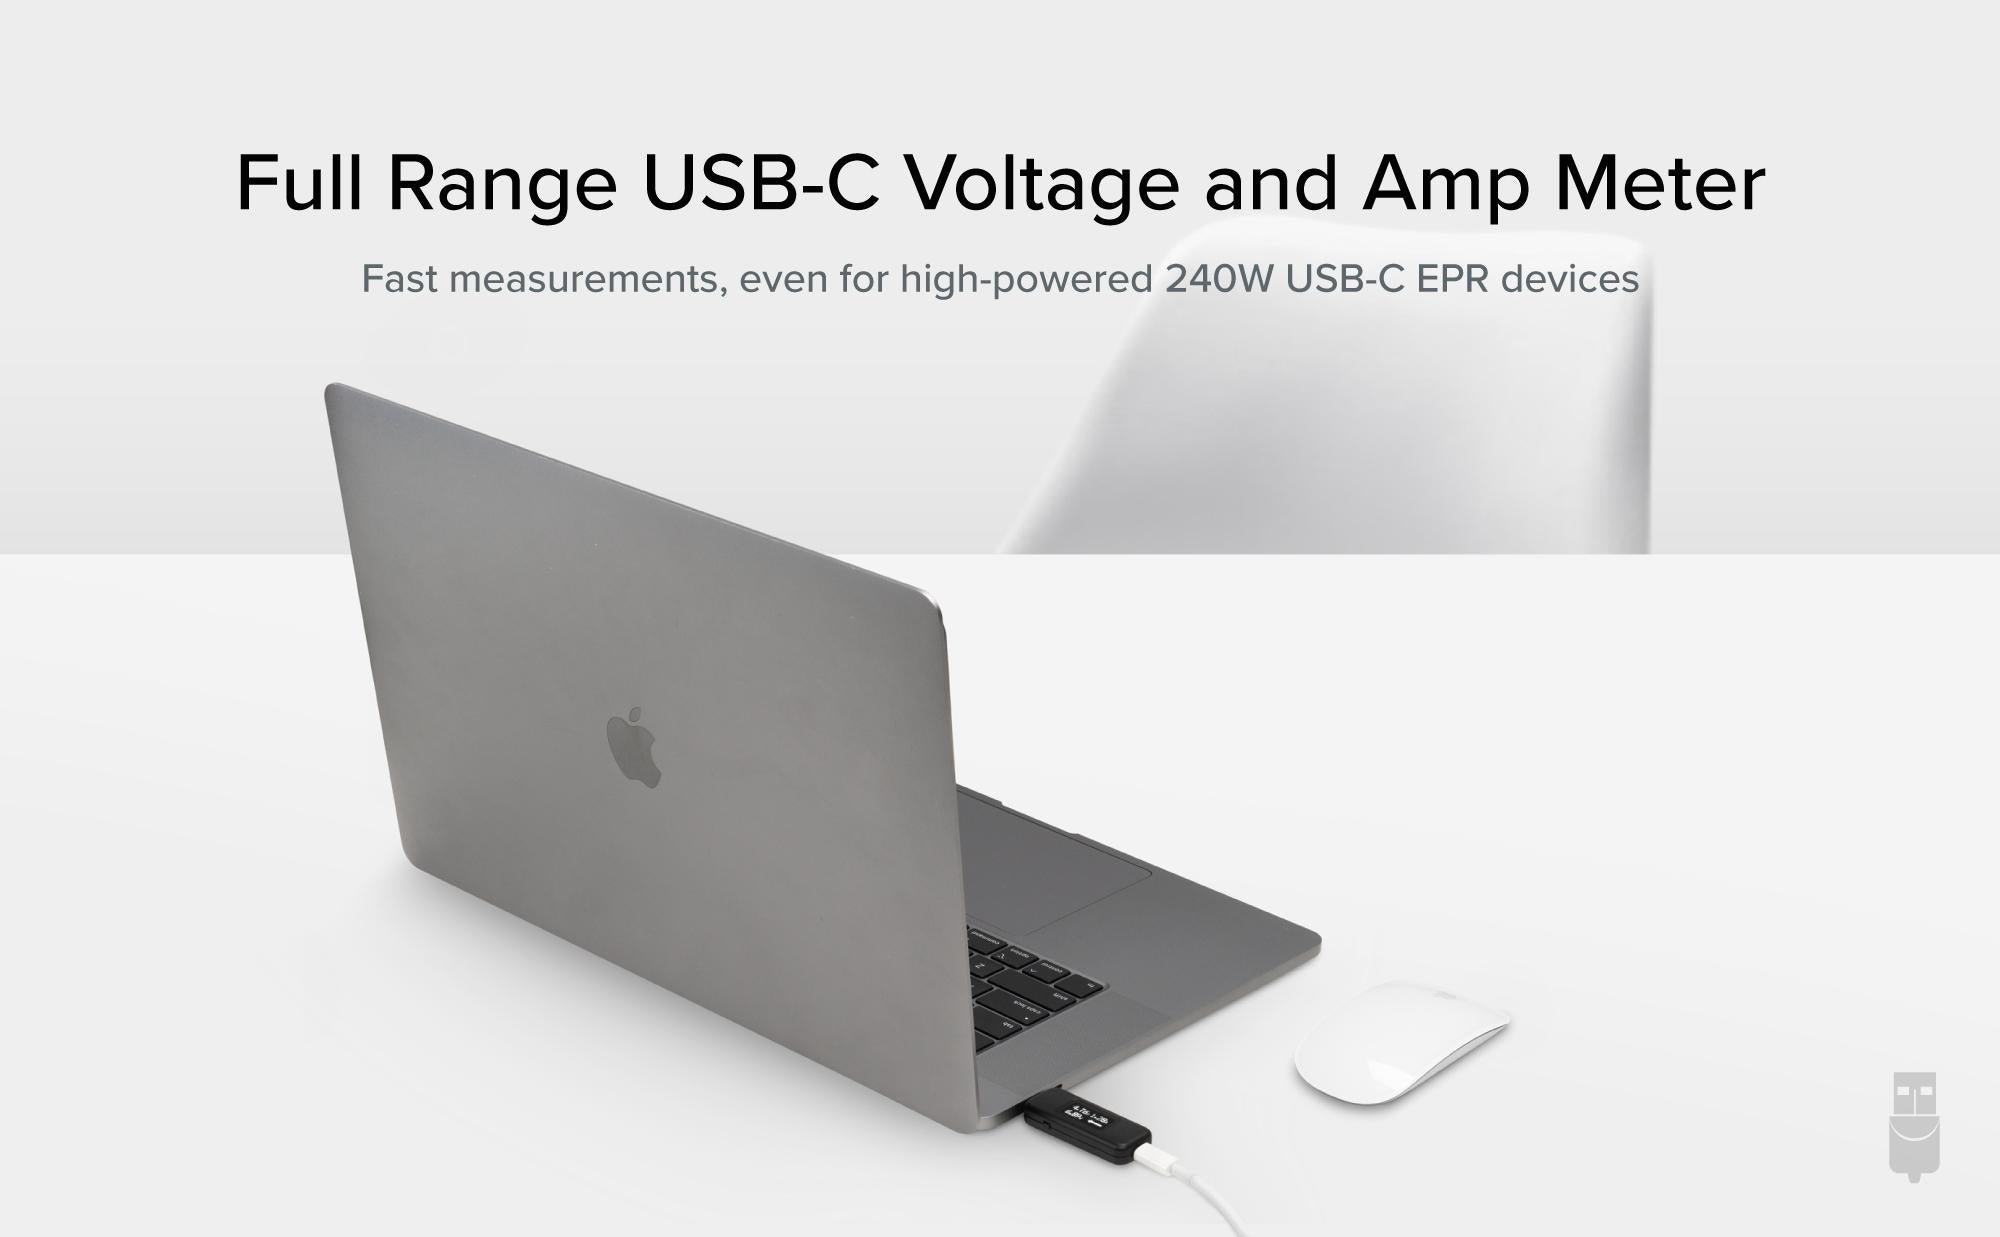 USBC-VAMETER3 Connected to a Laptop Charging